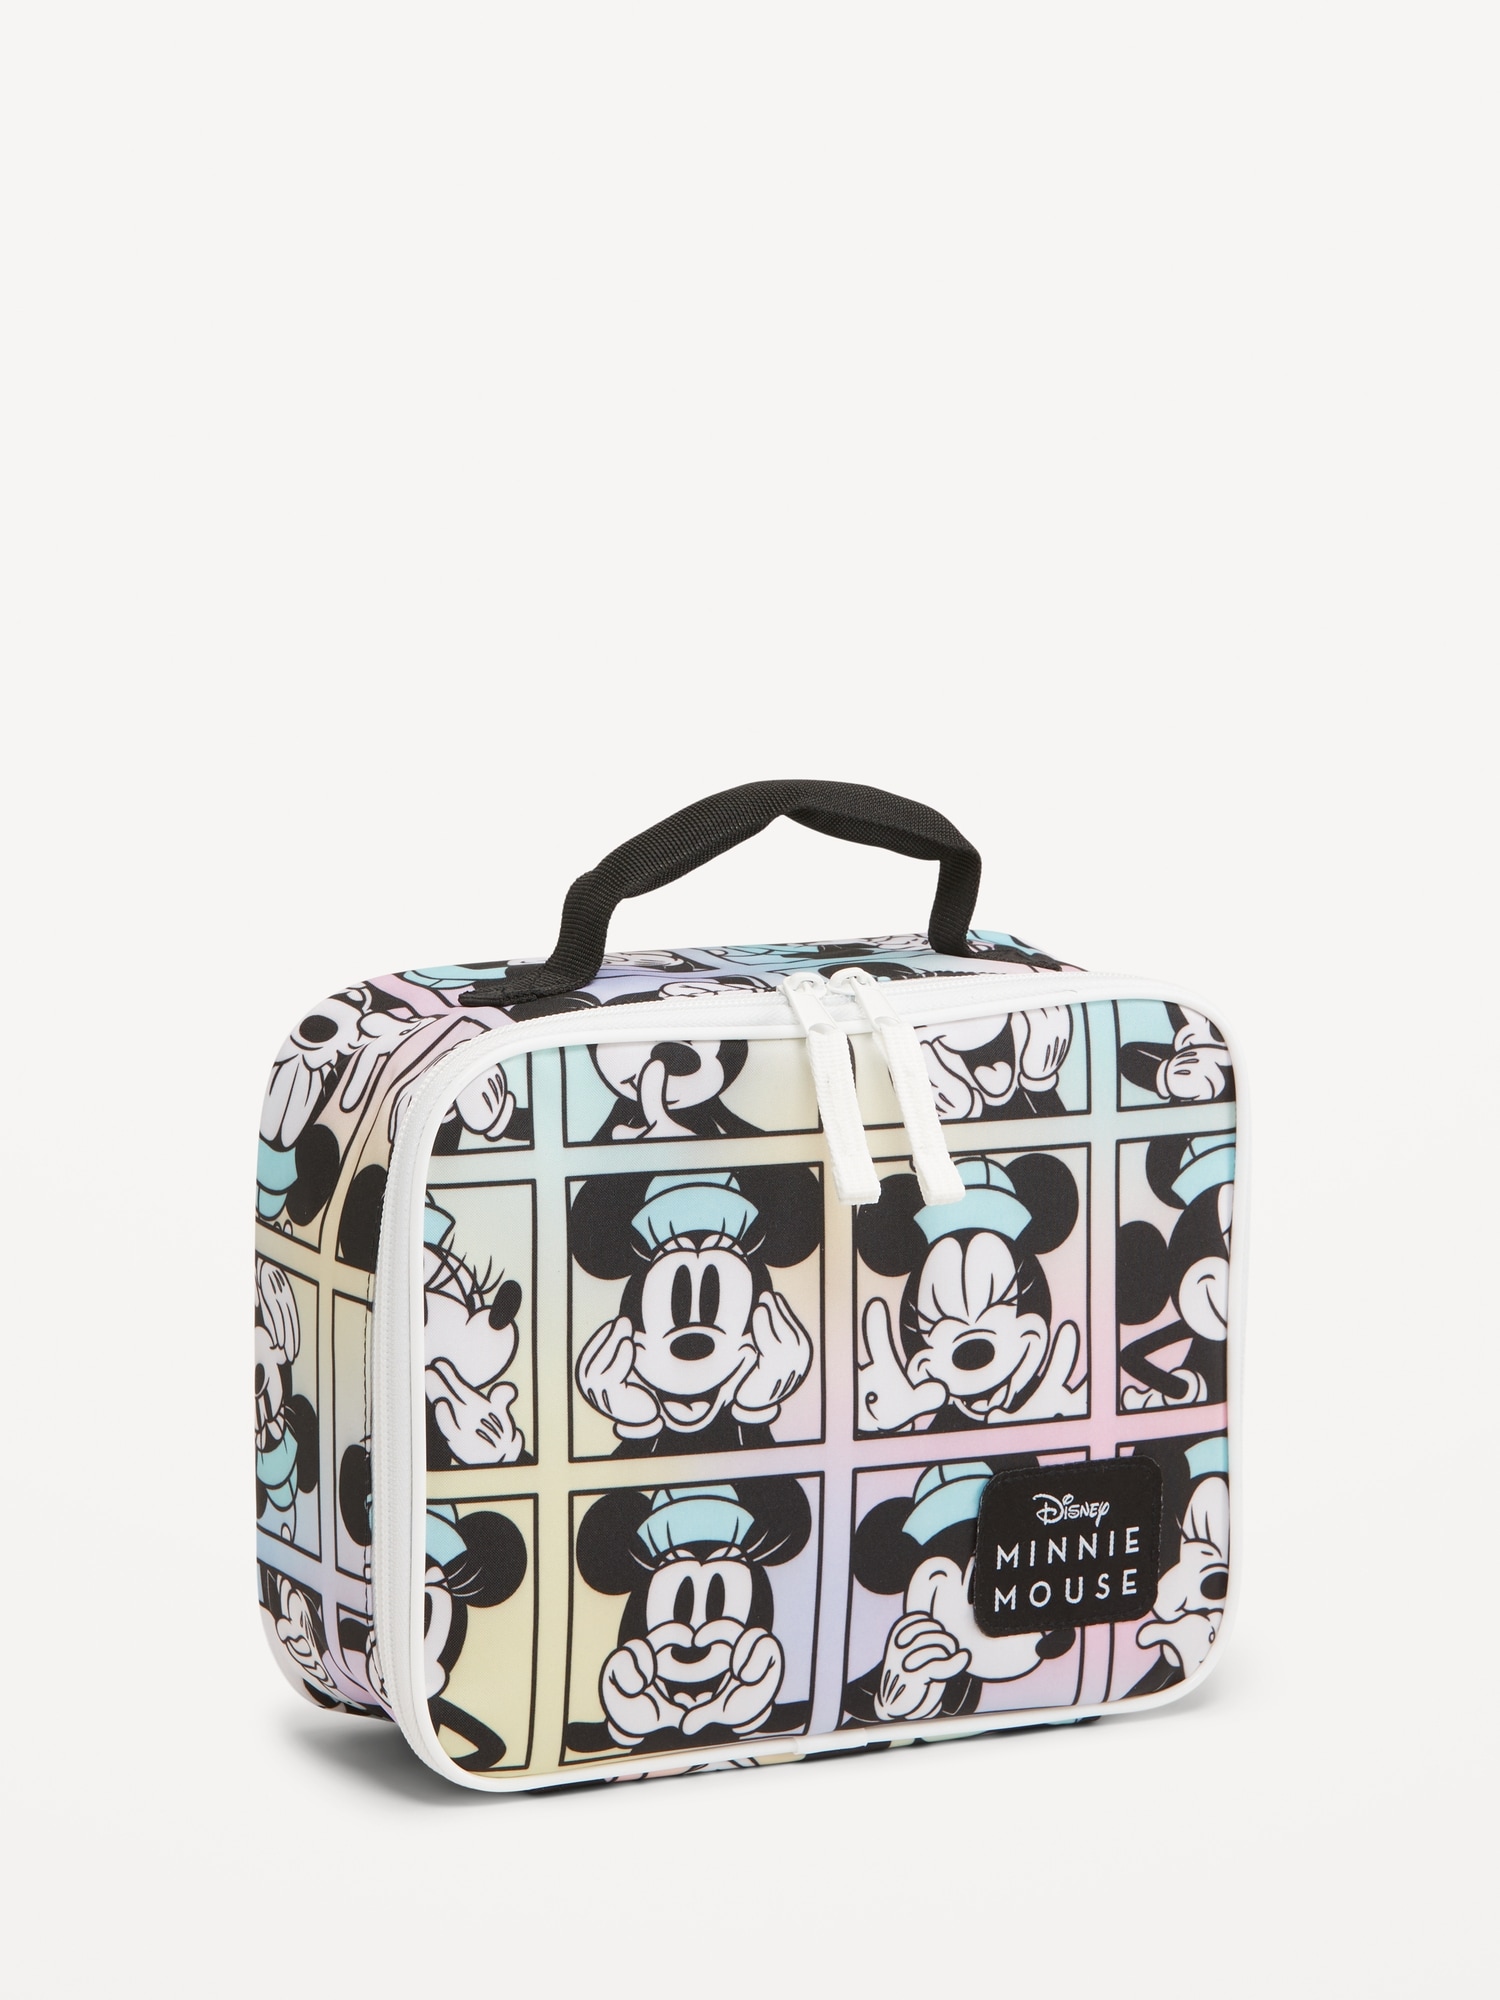 Disney© Minnie Mouse Lunch Bag for Kids